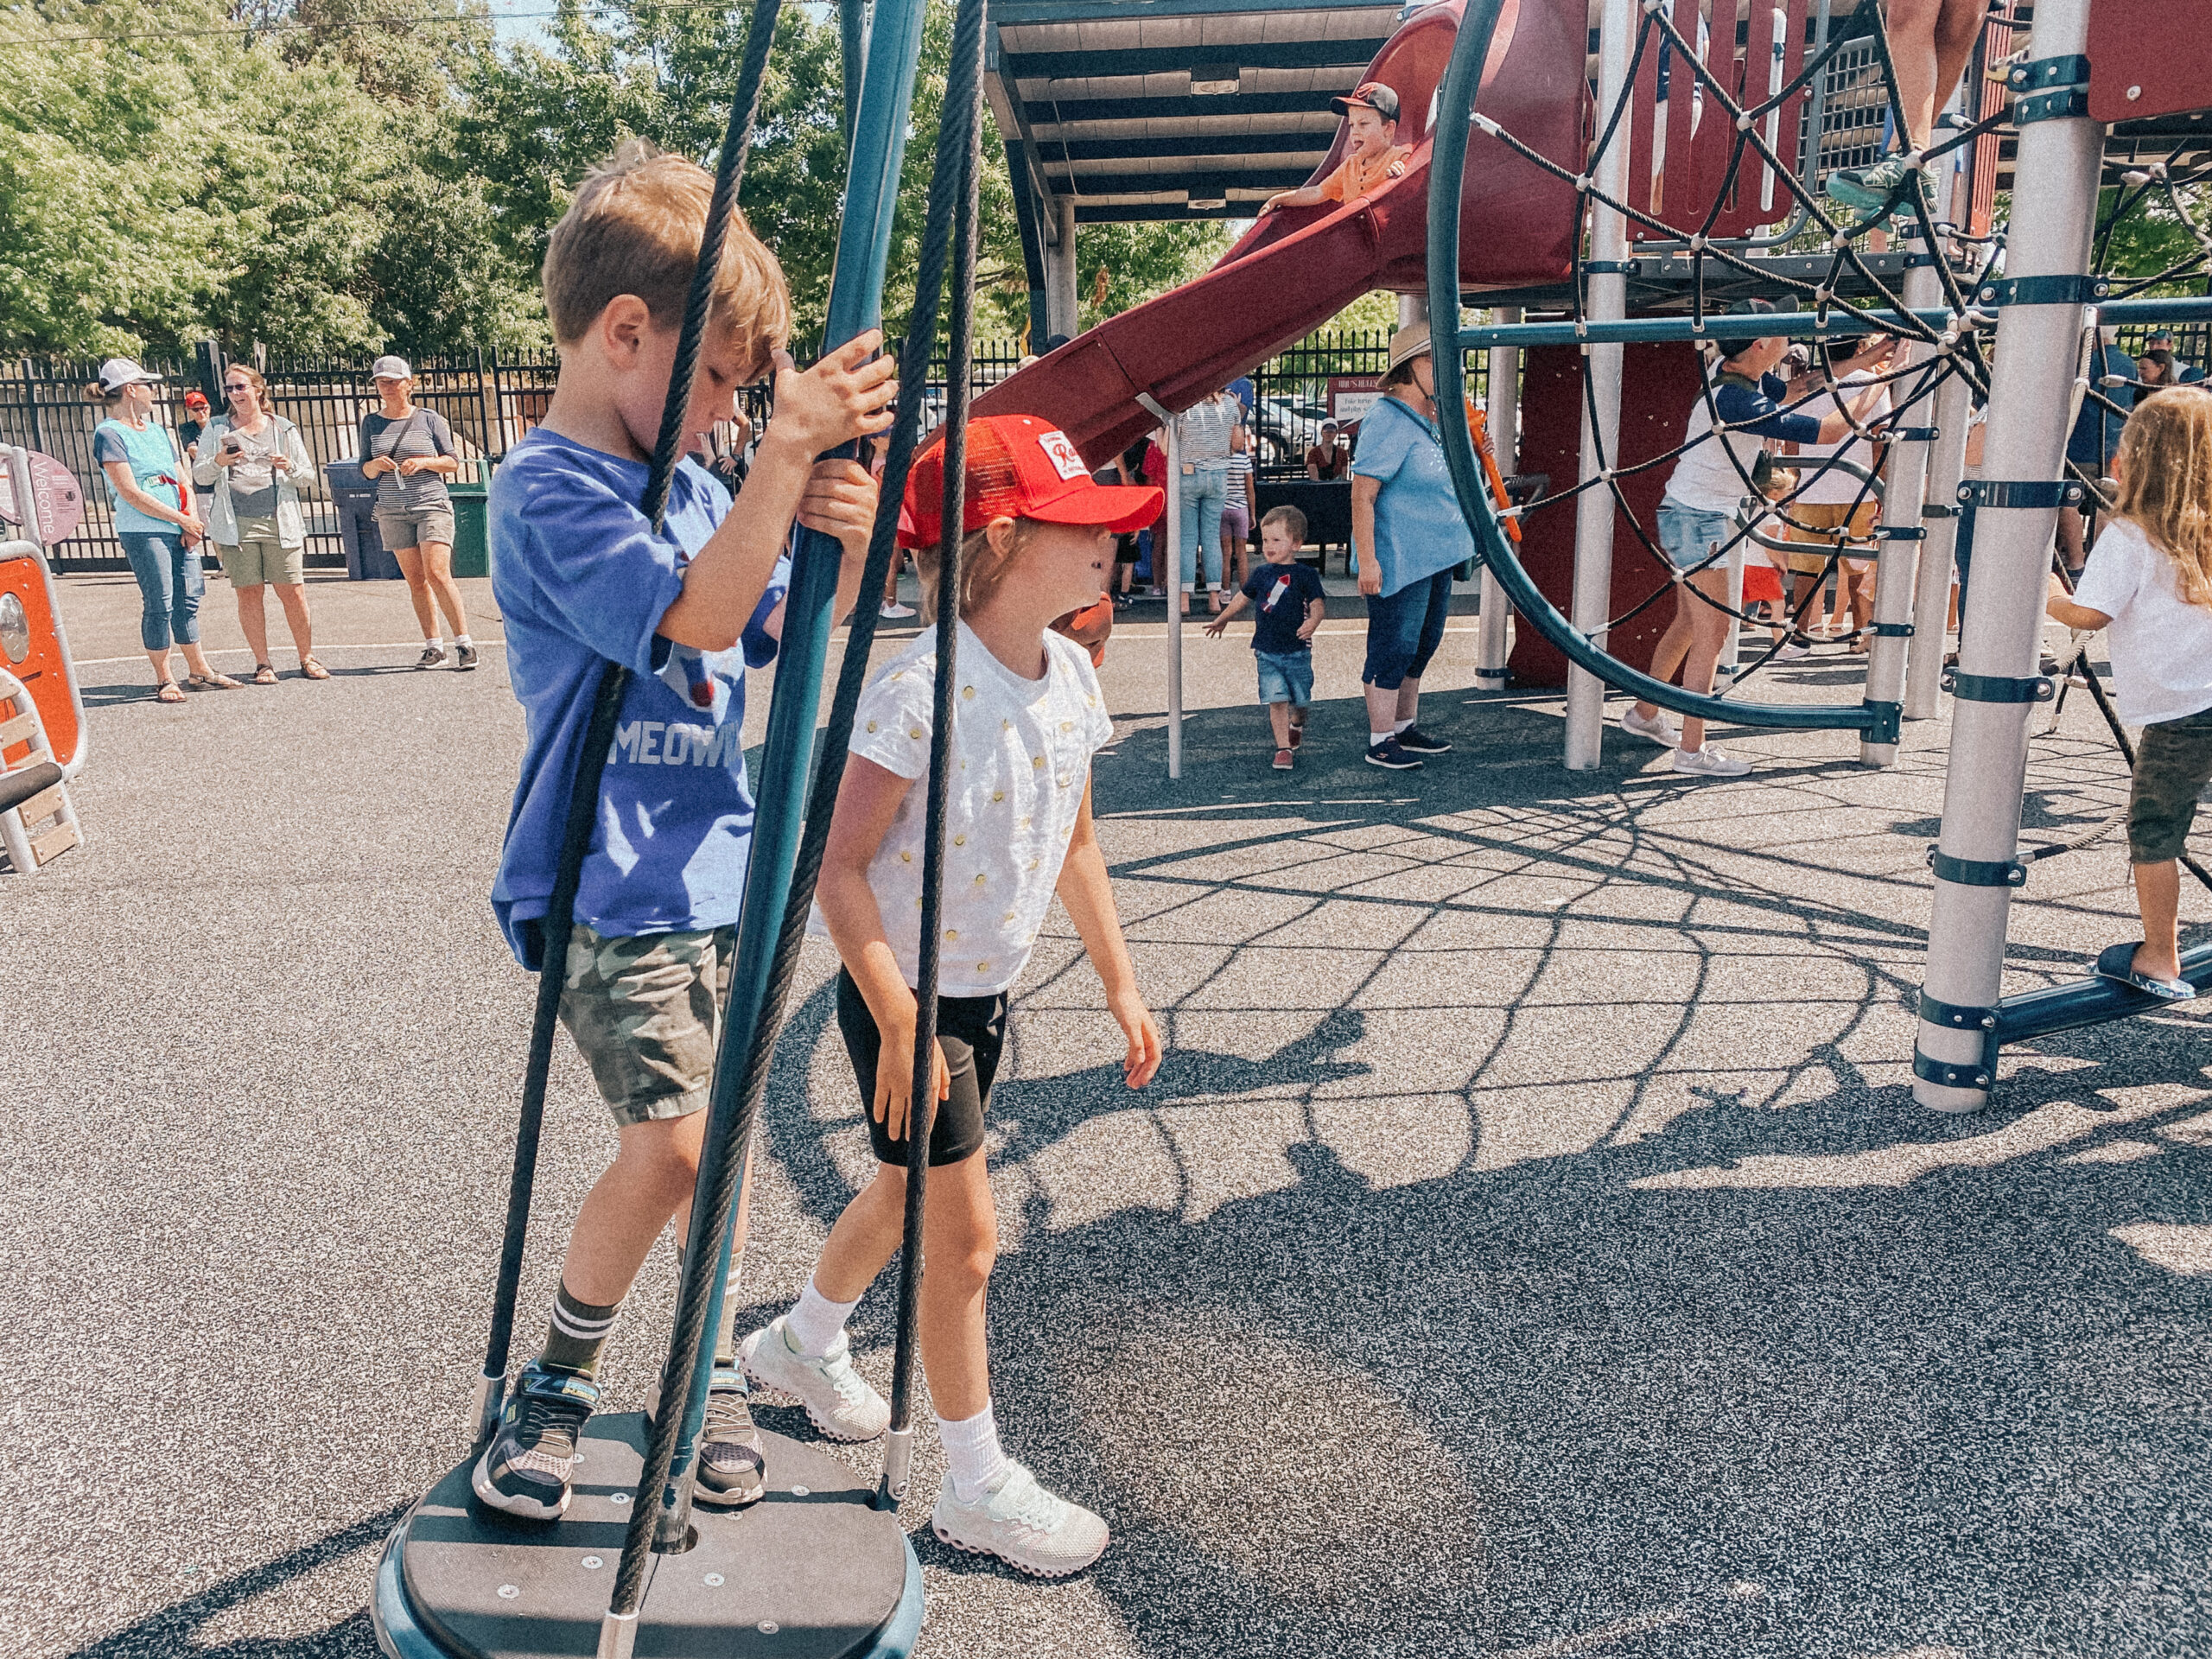 This is a photo a boy in a blue shirt and a girl in a red hat playing on a standing toy that spins at the playground at Cheney Stadium.